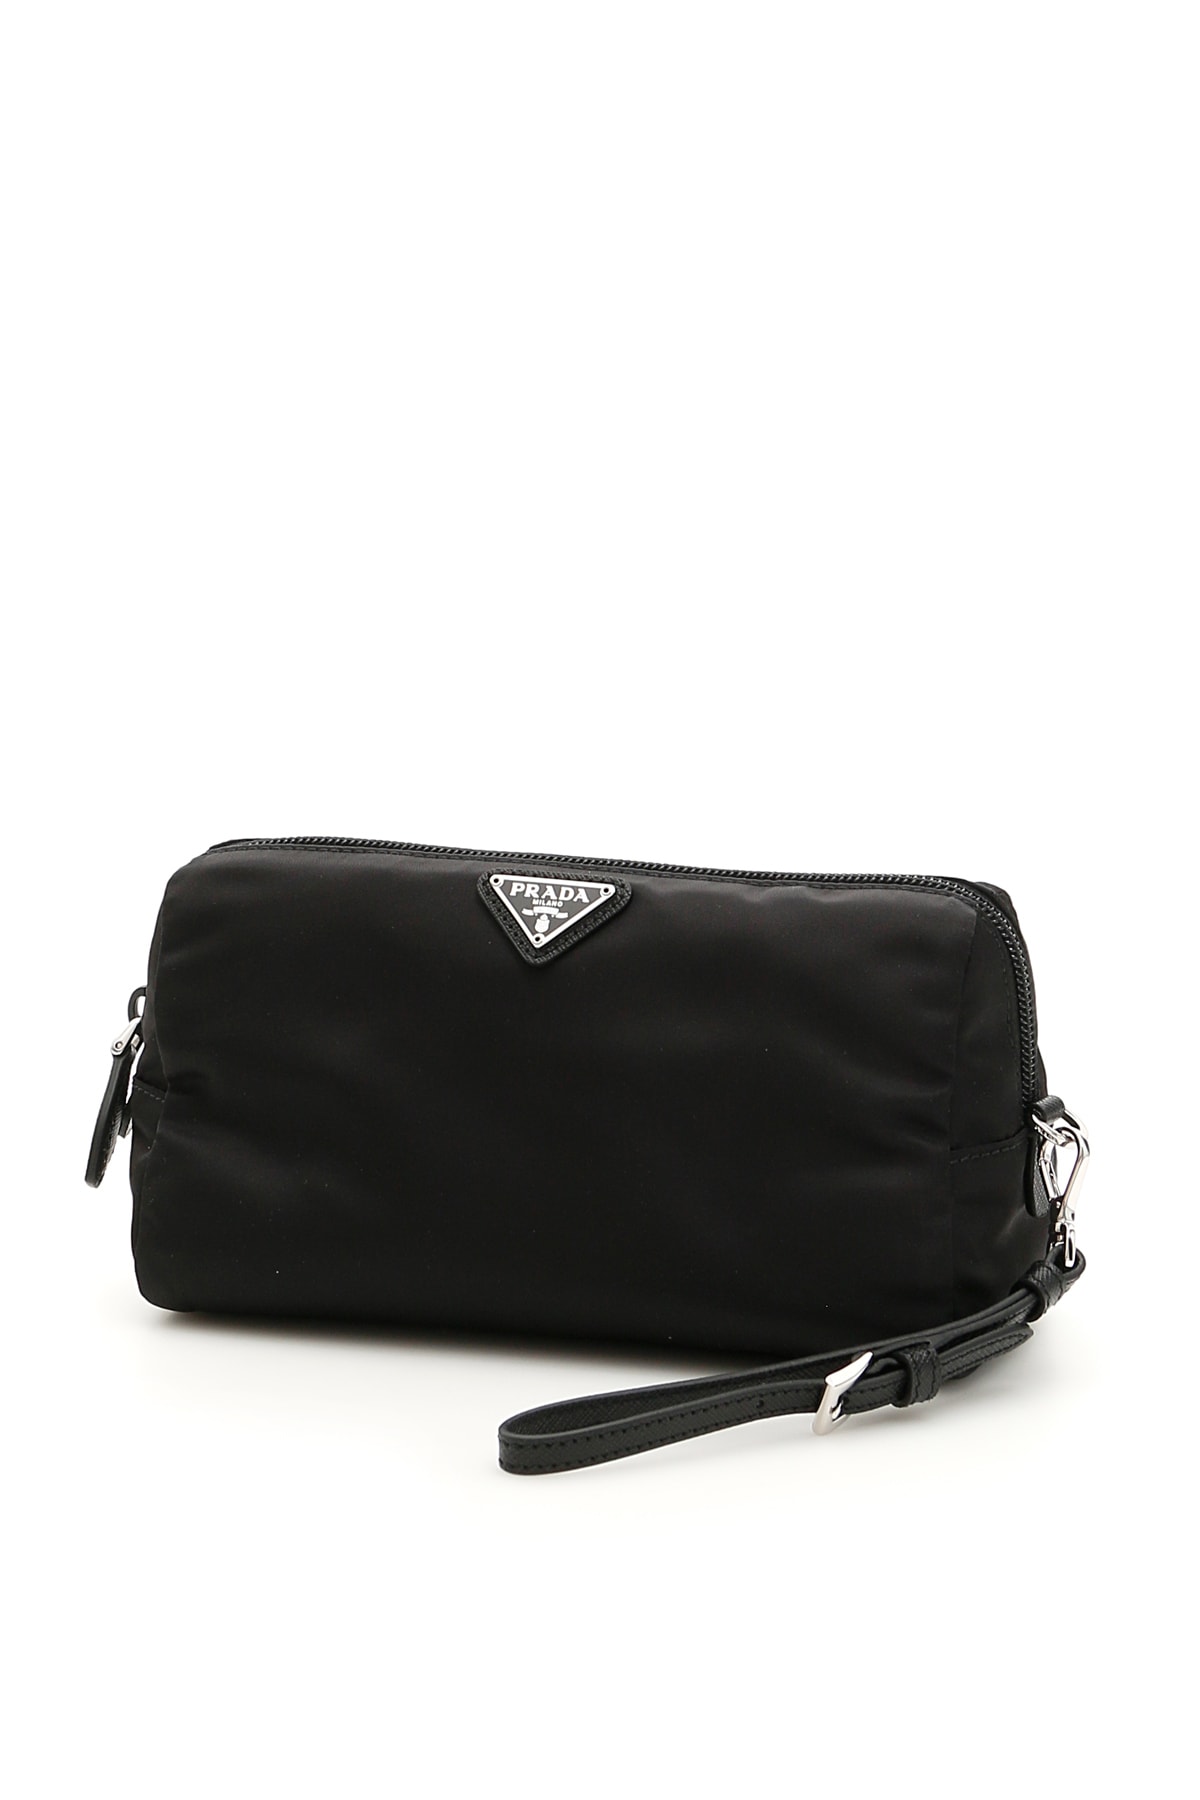 Prada Pouch With Handle In Nero